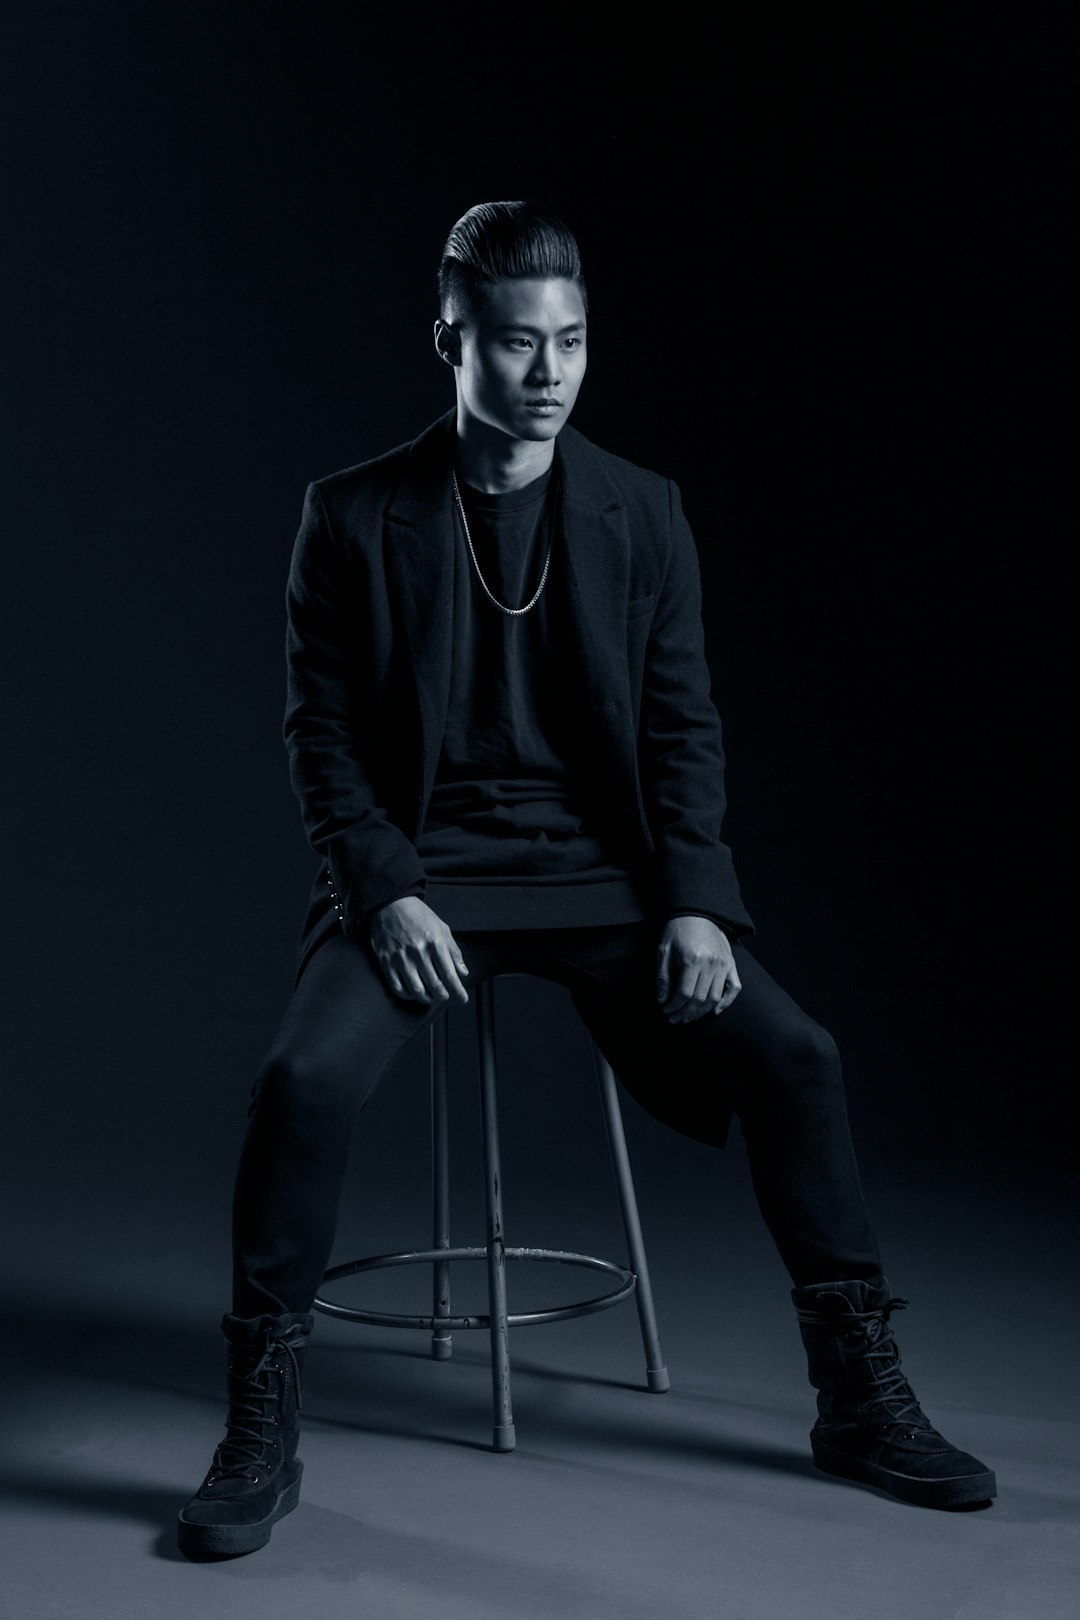 full body photography of an Asian man sitting on a bar stool, wearing a black blazer and t-shirt with dark pants, clean shaven face, very short hair style, posing for a photoshoot, dark background, studio lighting, black and white. –ar 85:128